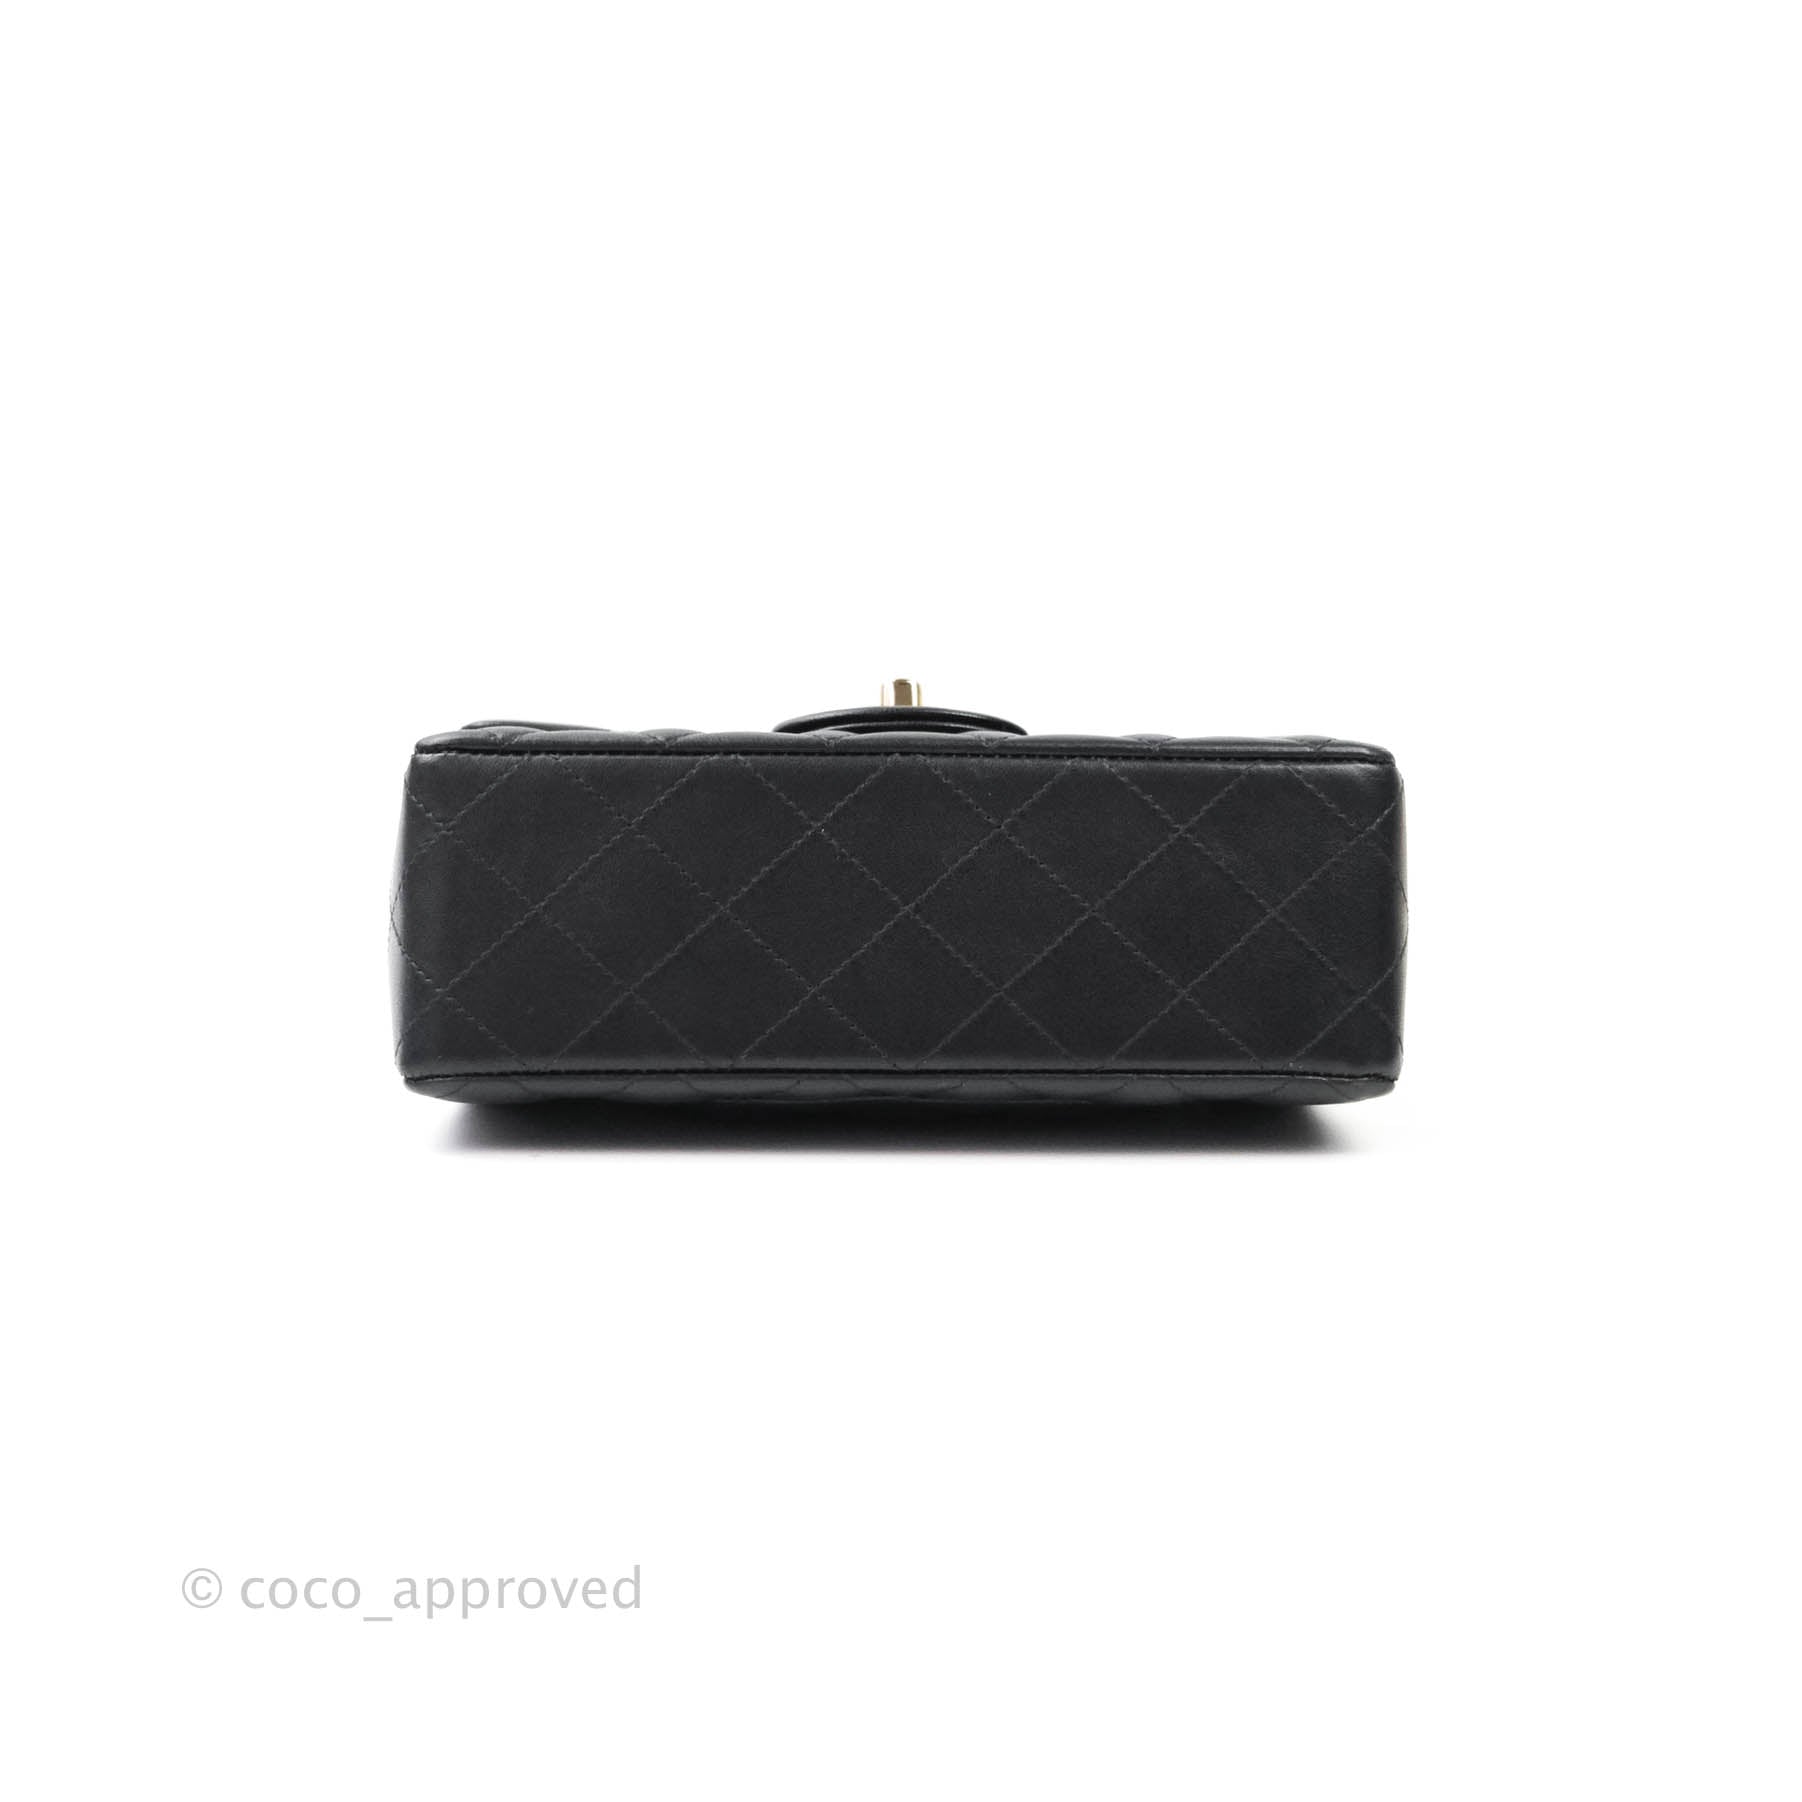 BagButler - Sophisticated and understated here is our favourite Chanel mini  flap bag in a pale and soft chevron grey. With gold-toned metalwork, this  is perfect for weddings and special events needing